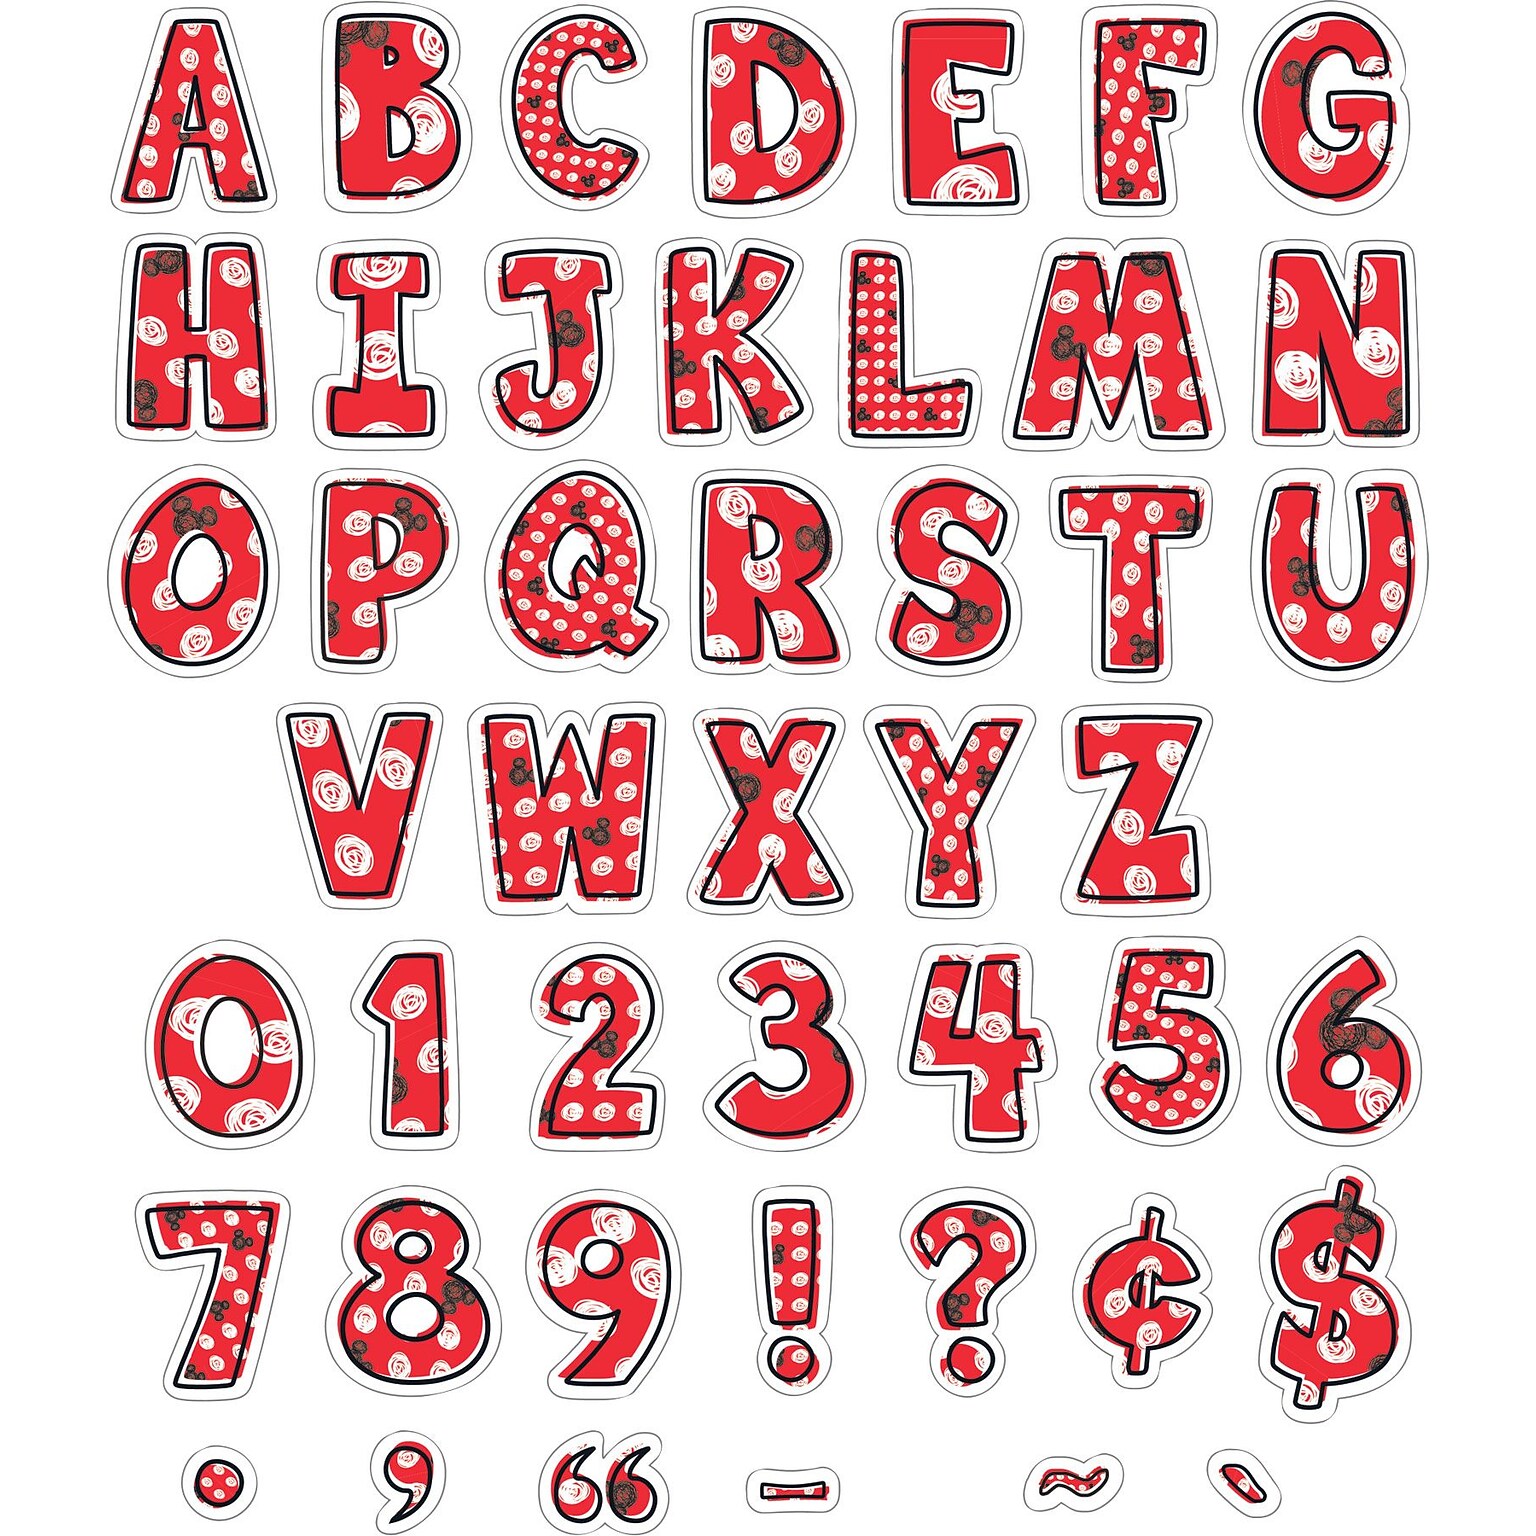 Eureka Mickey Color Pop! Deco Character Letters, 177/Pack